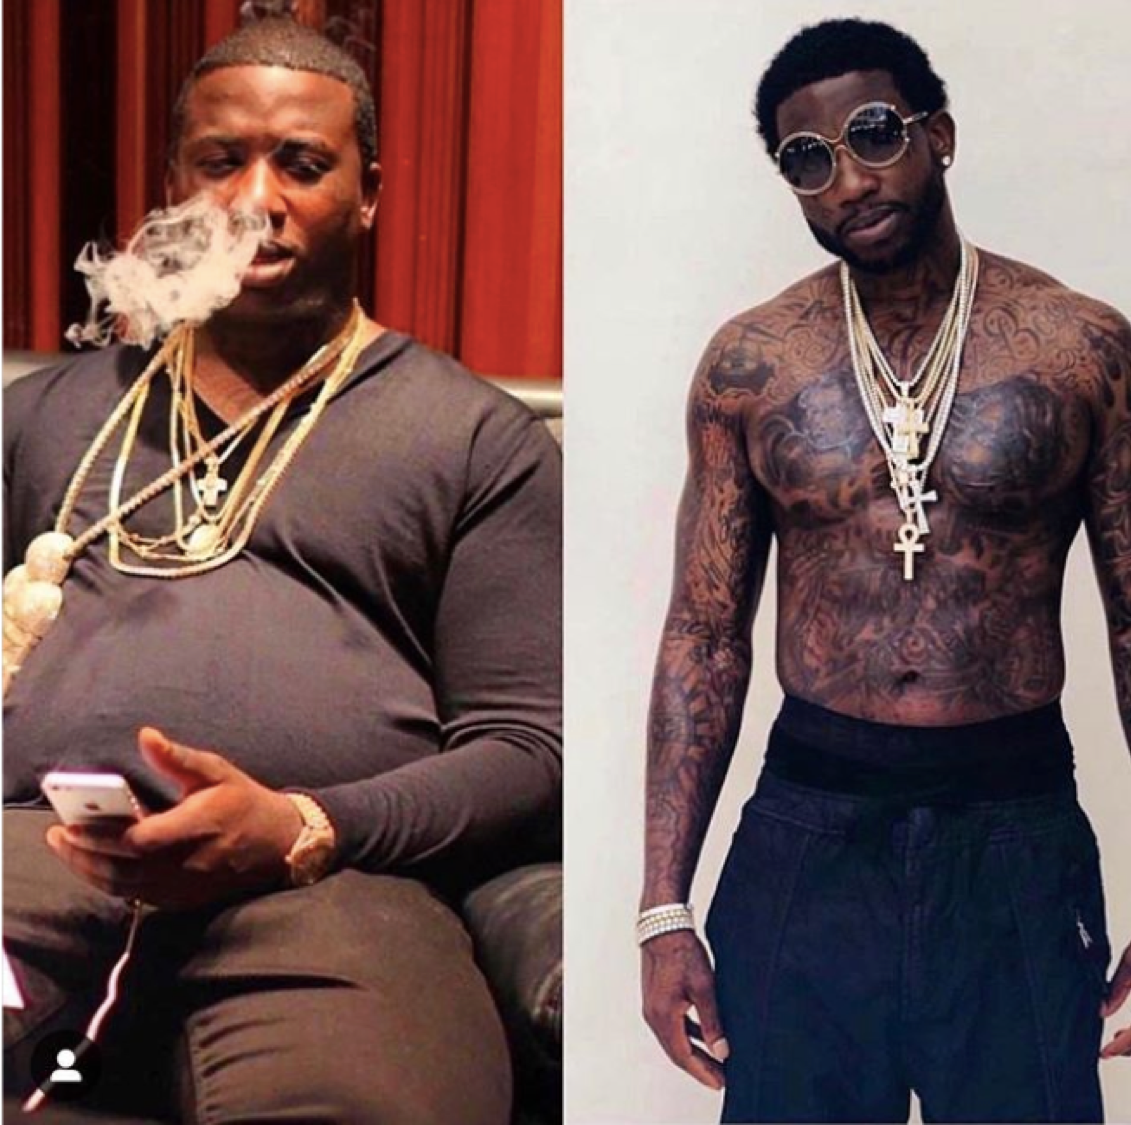 Will Gucci Mane Ever Go Back To His Old Life? 